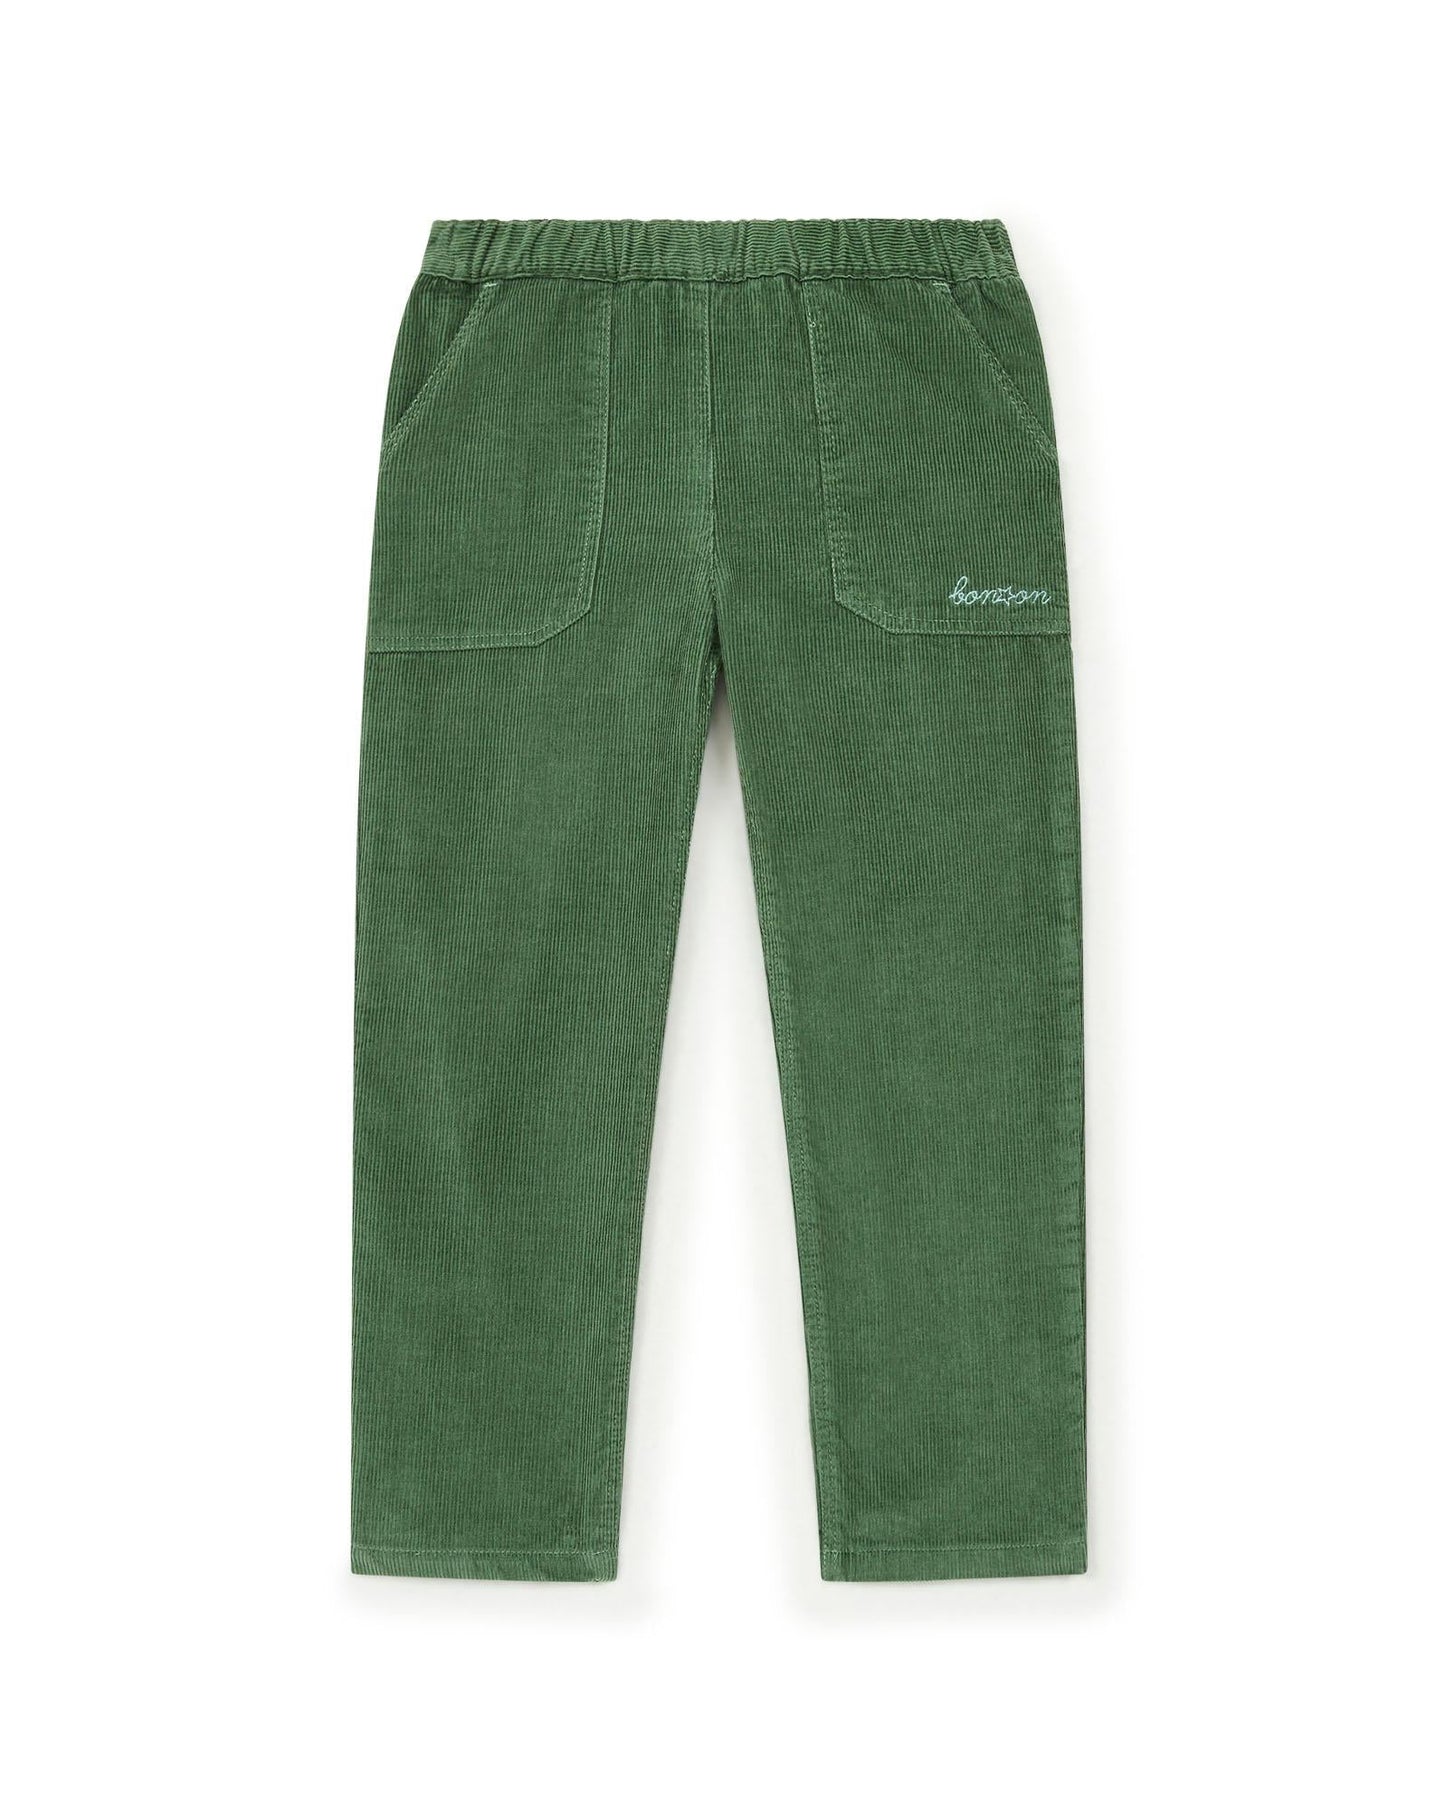 Trousers Batcha Green in tweed cotton